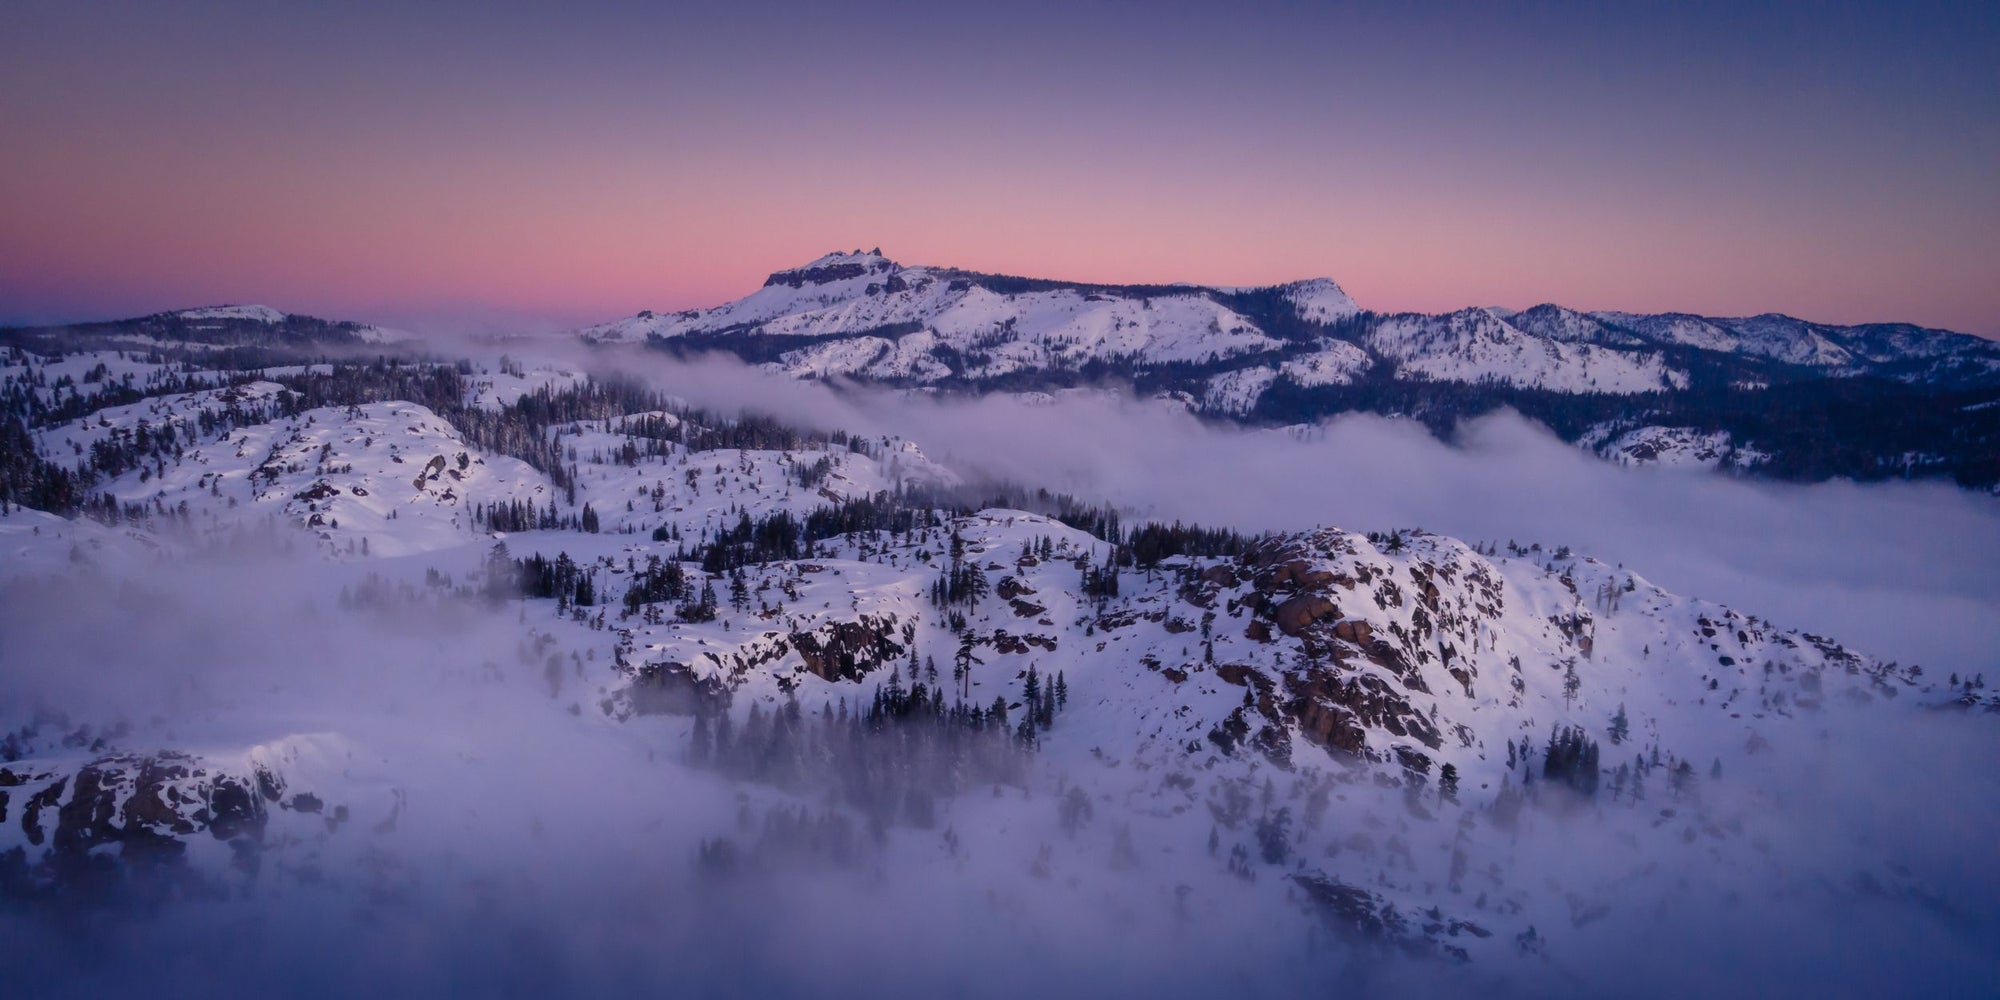 Fog lingers along snowcapped mountains that sit along a pink and purple horizon.